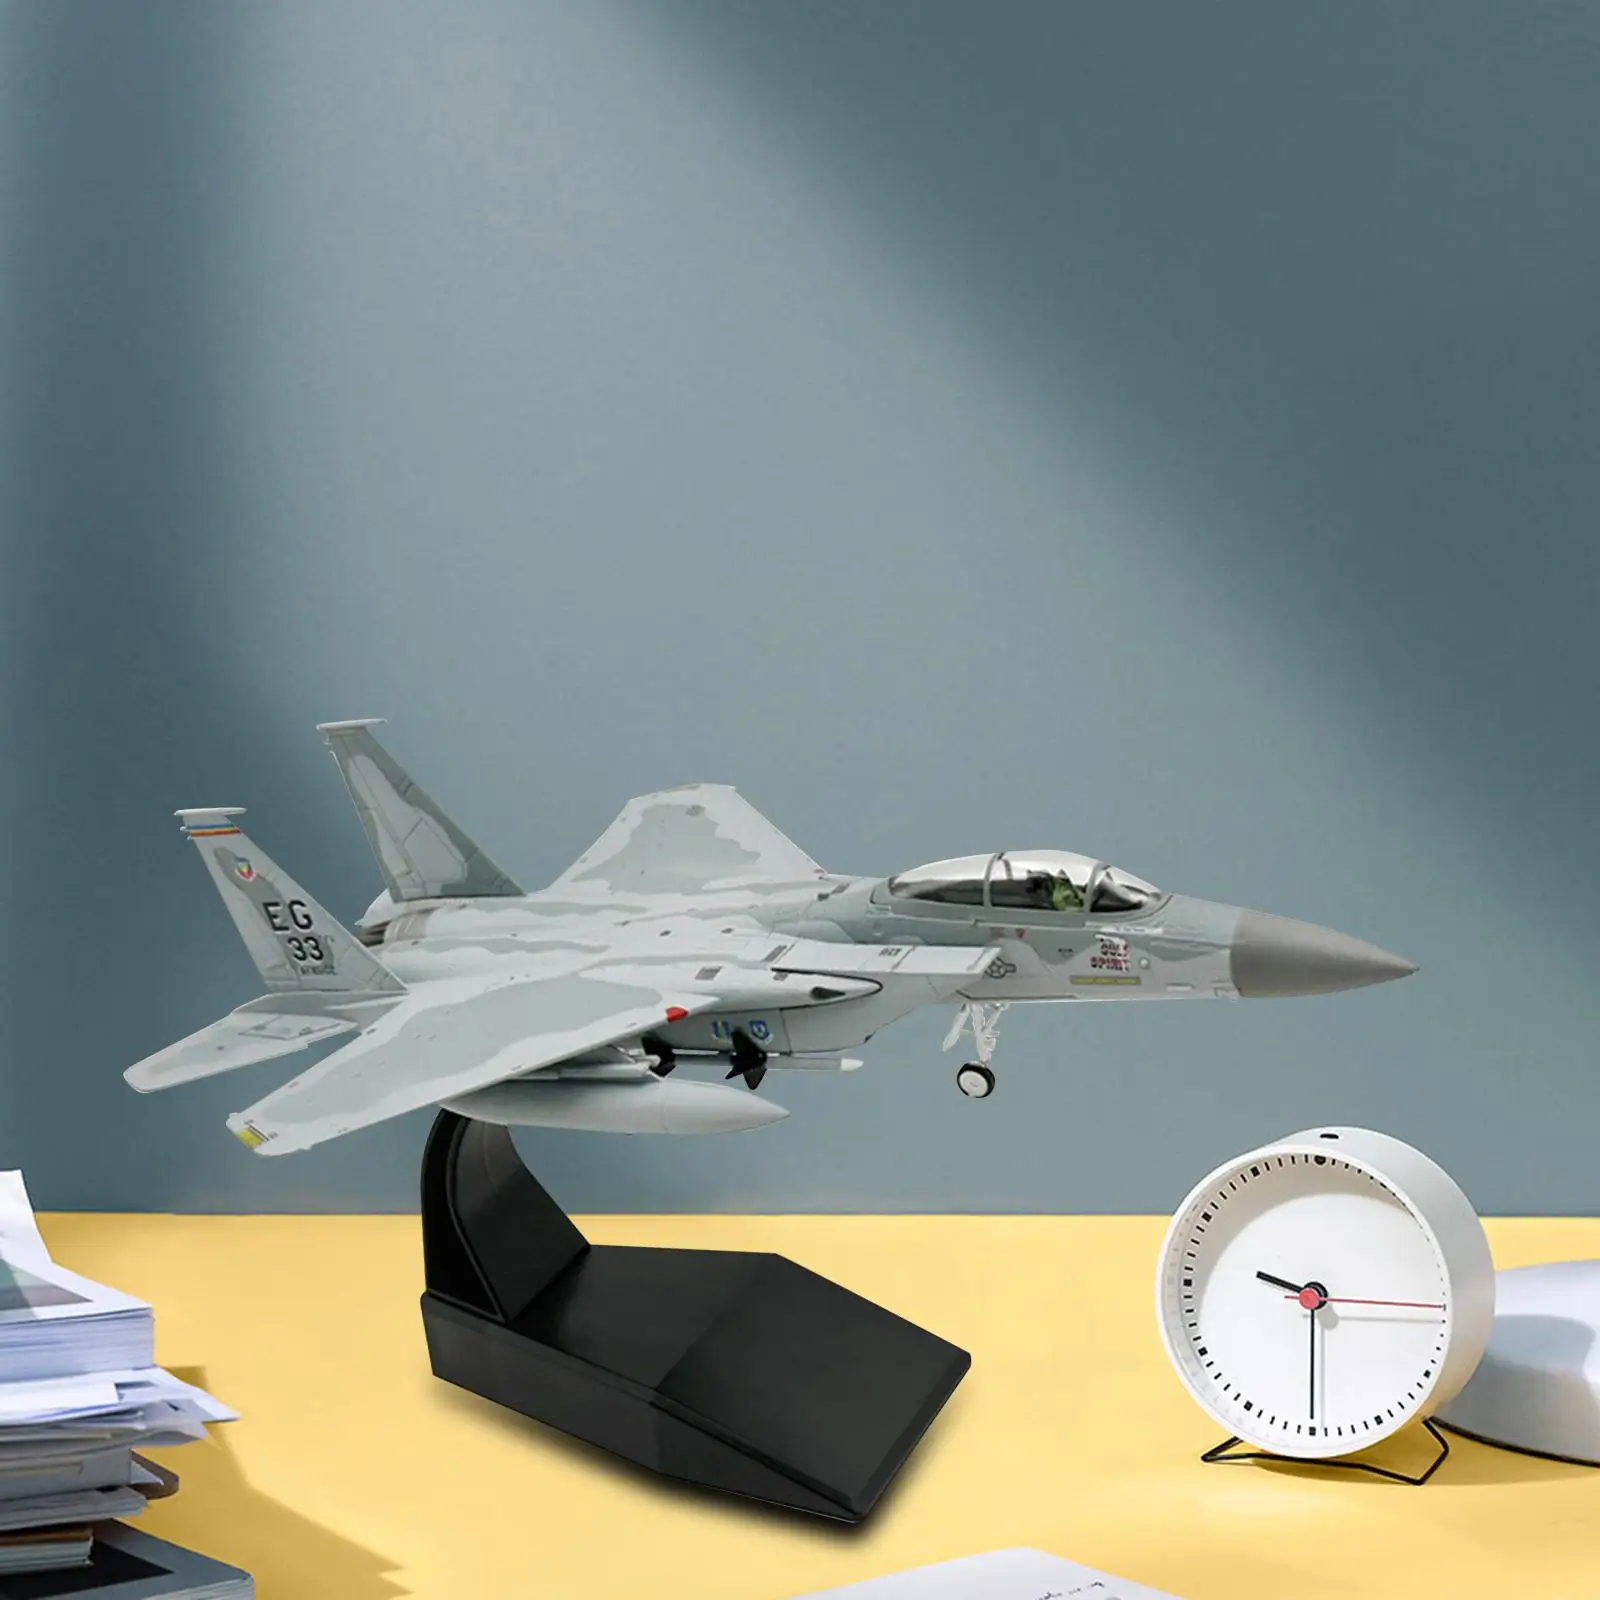 Collectibles Display Plane Simulation Plane Model for Home Decoration Ornament Office Decor Collections Adults Gifts